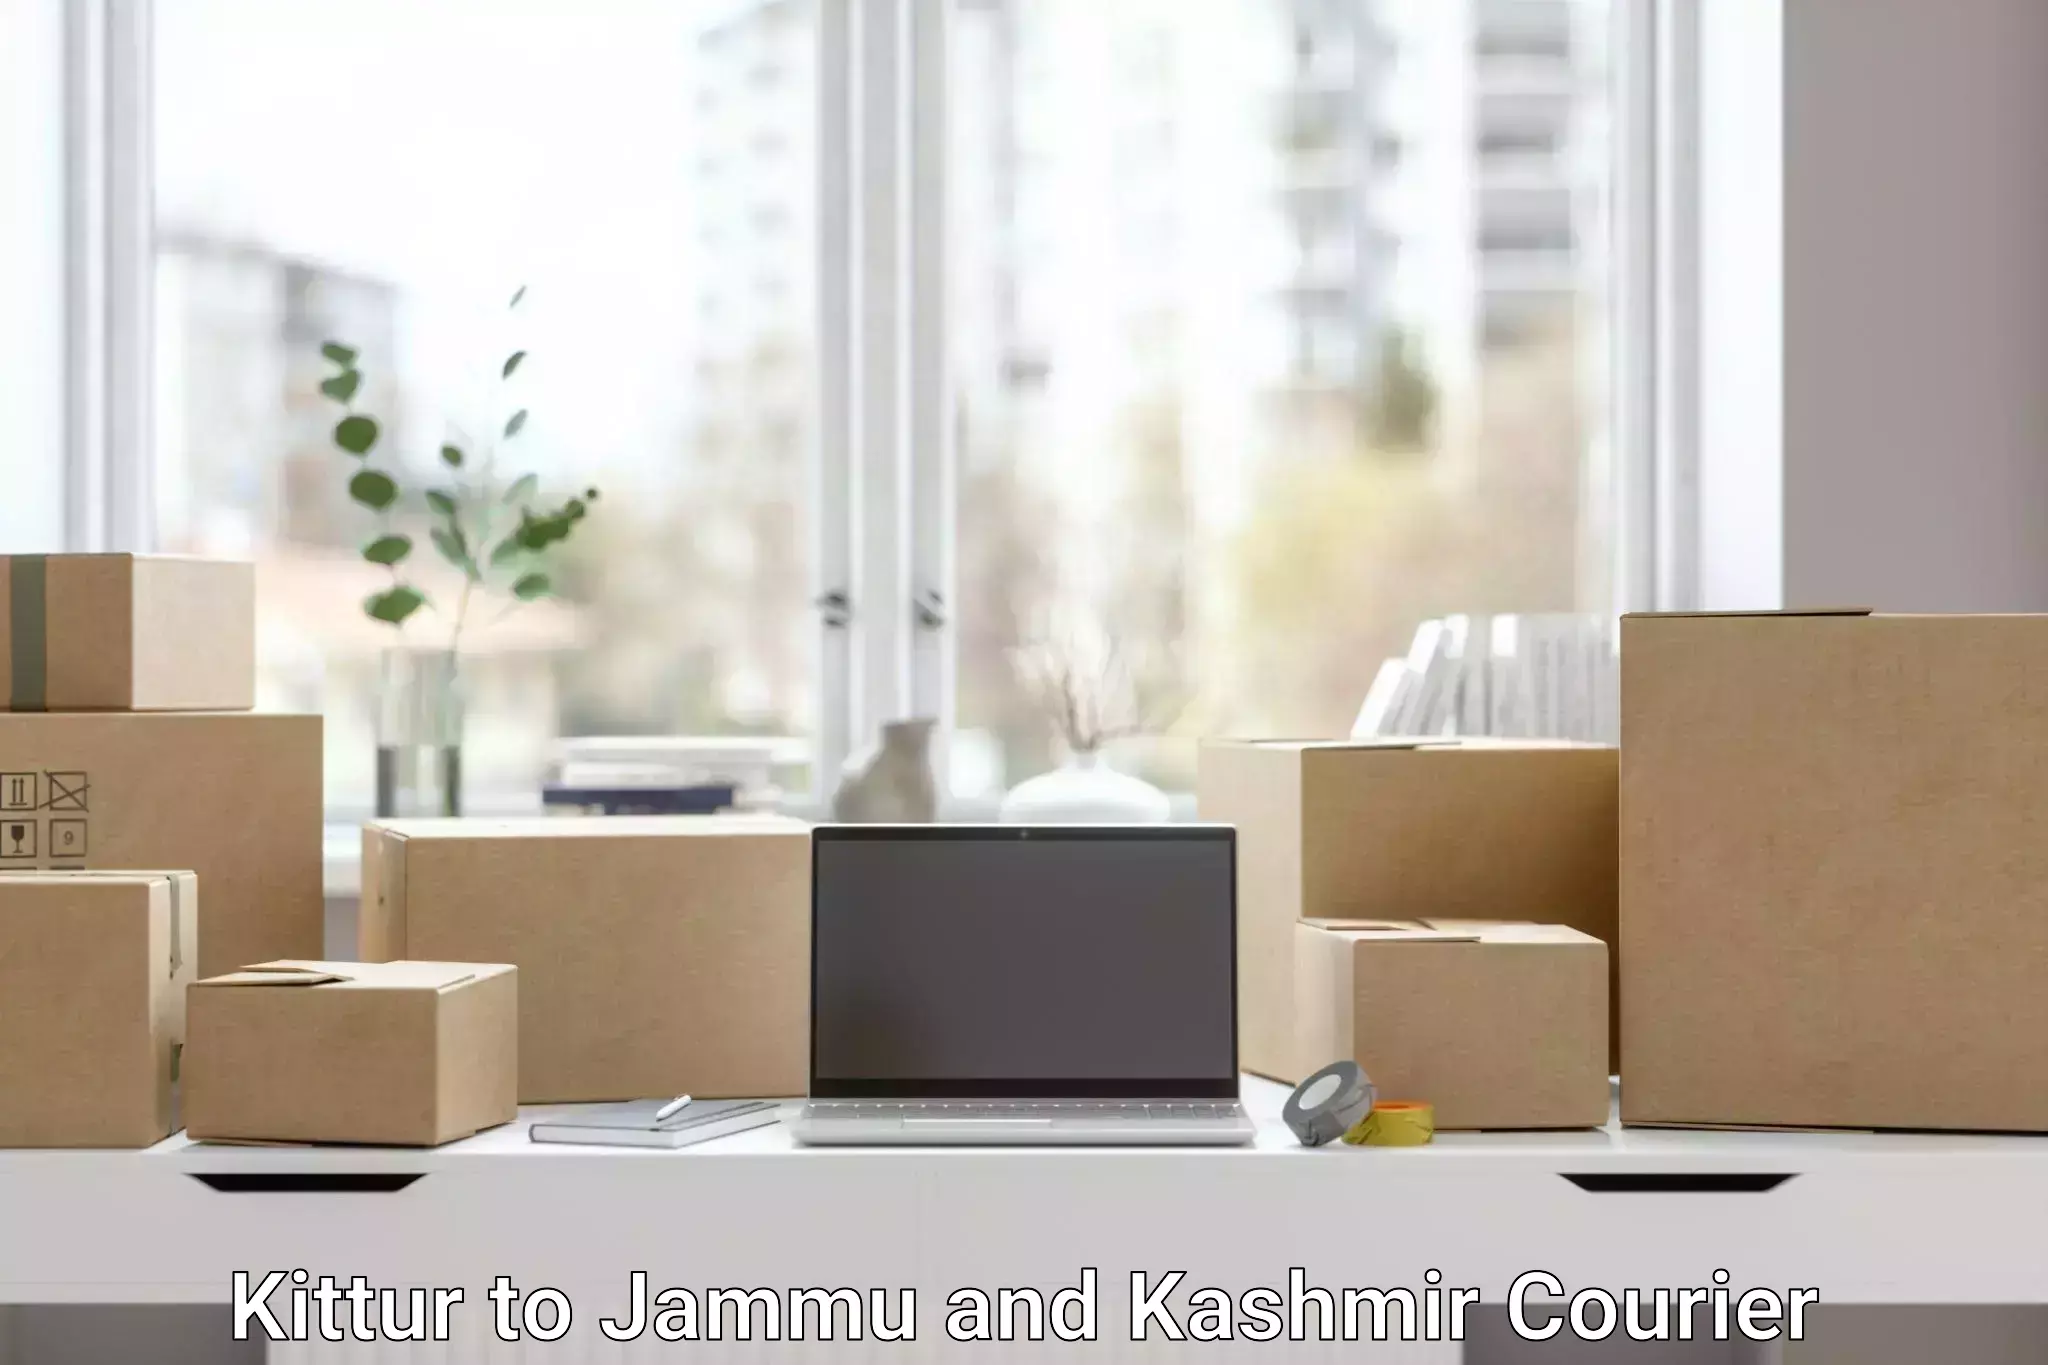 Pharmaceutical courier in Kittur to Jammu and Kashmir